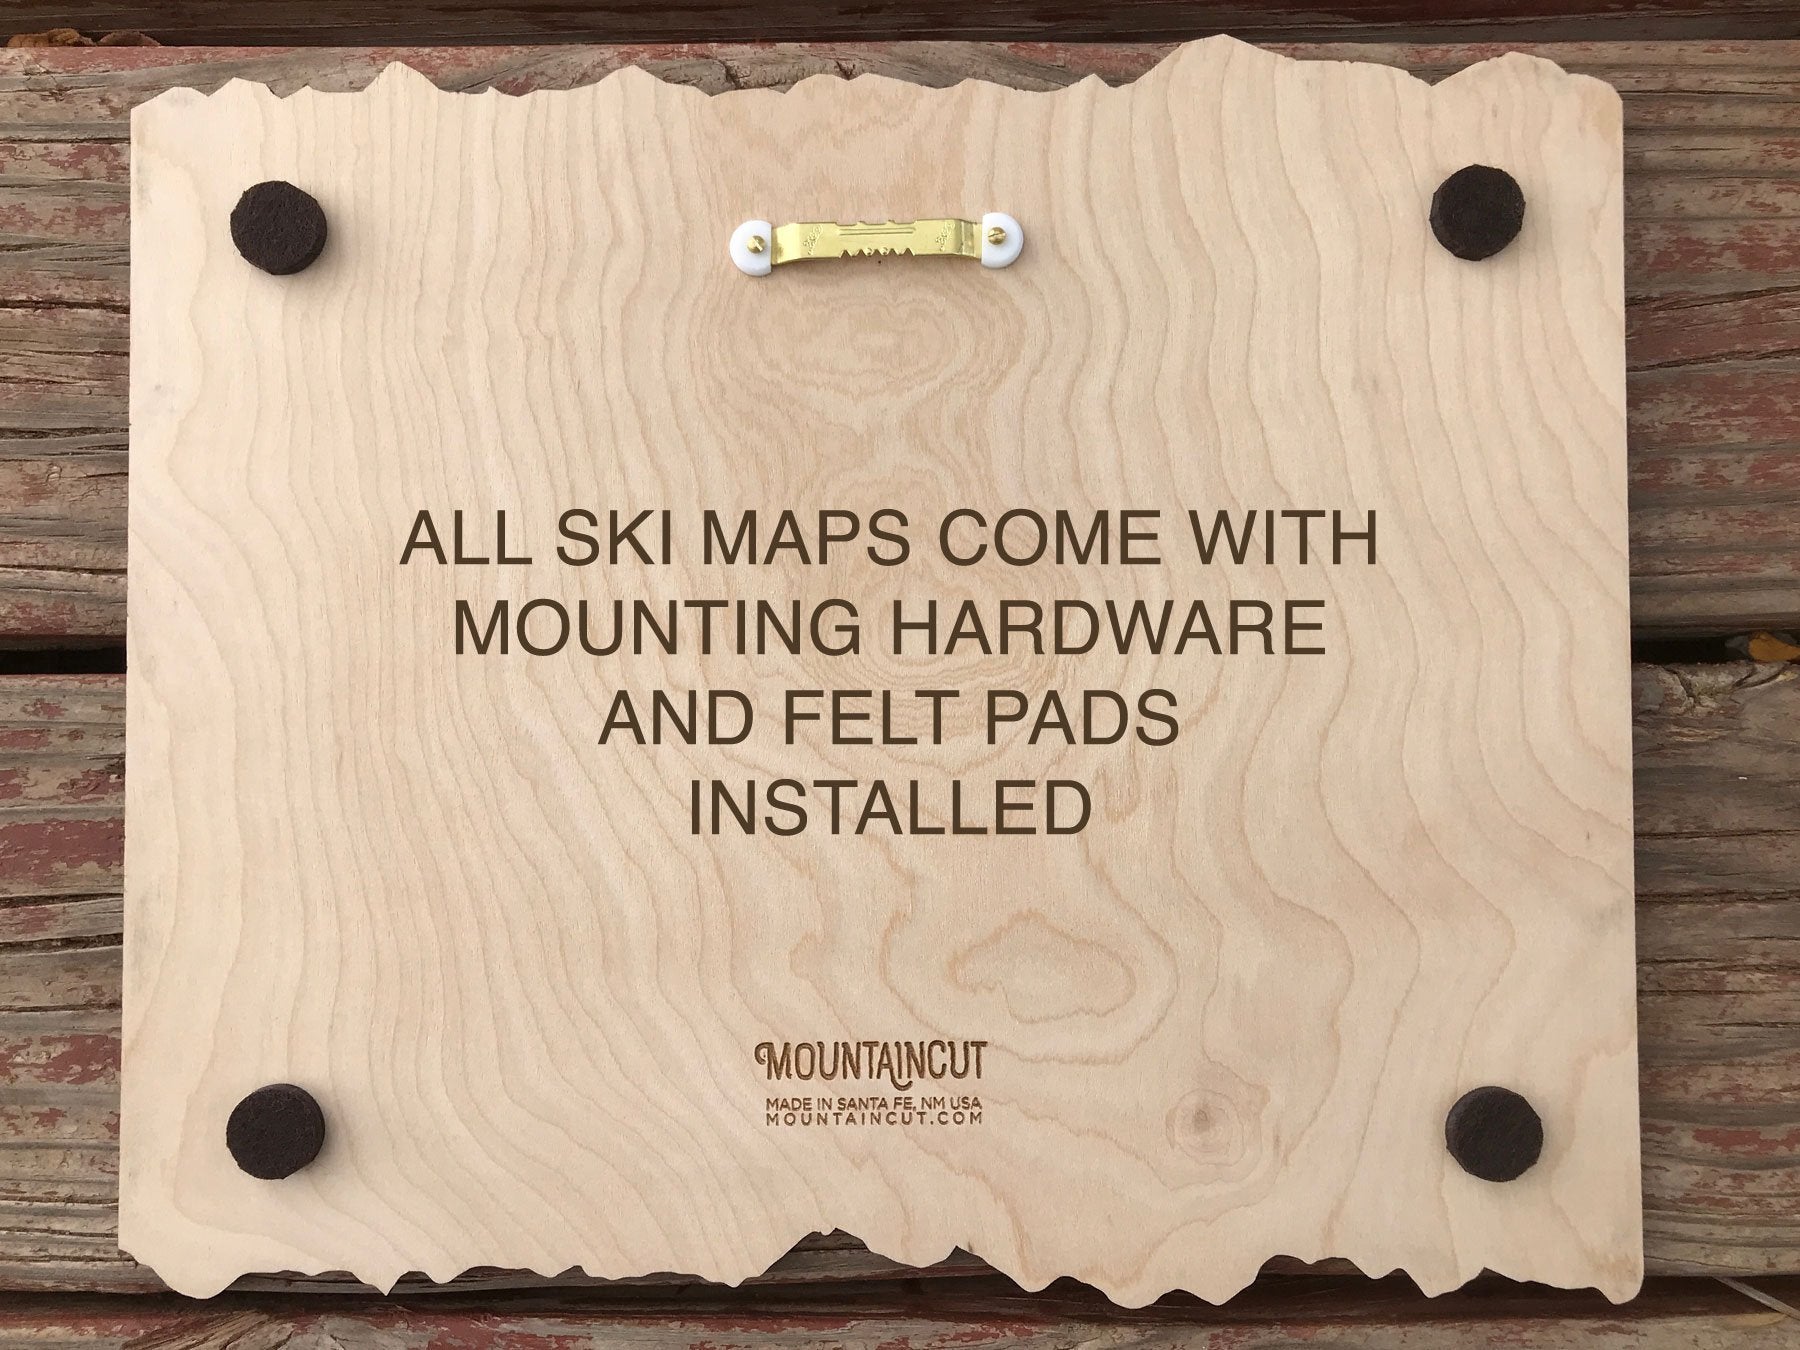 Pacific Crest Trail Map - Wood cut map of PCT Gift for Hikers